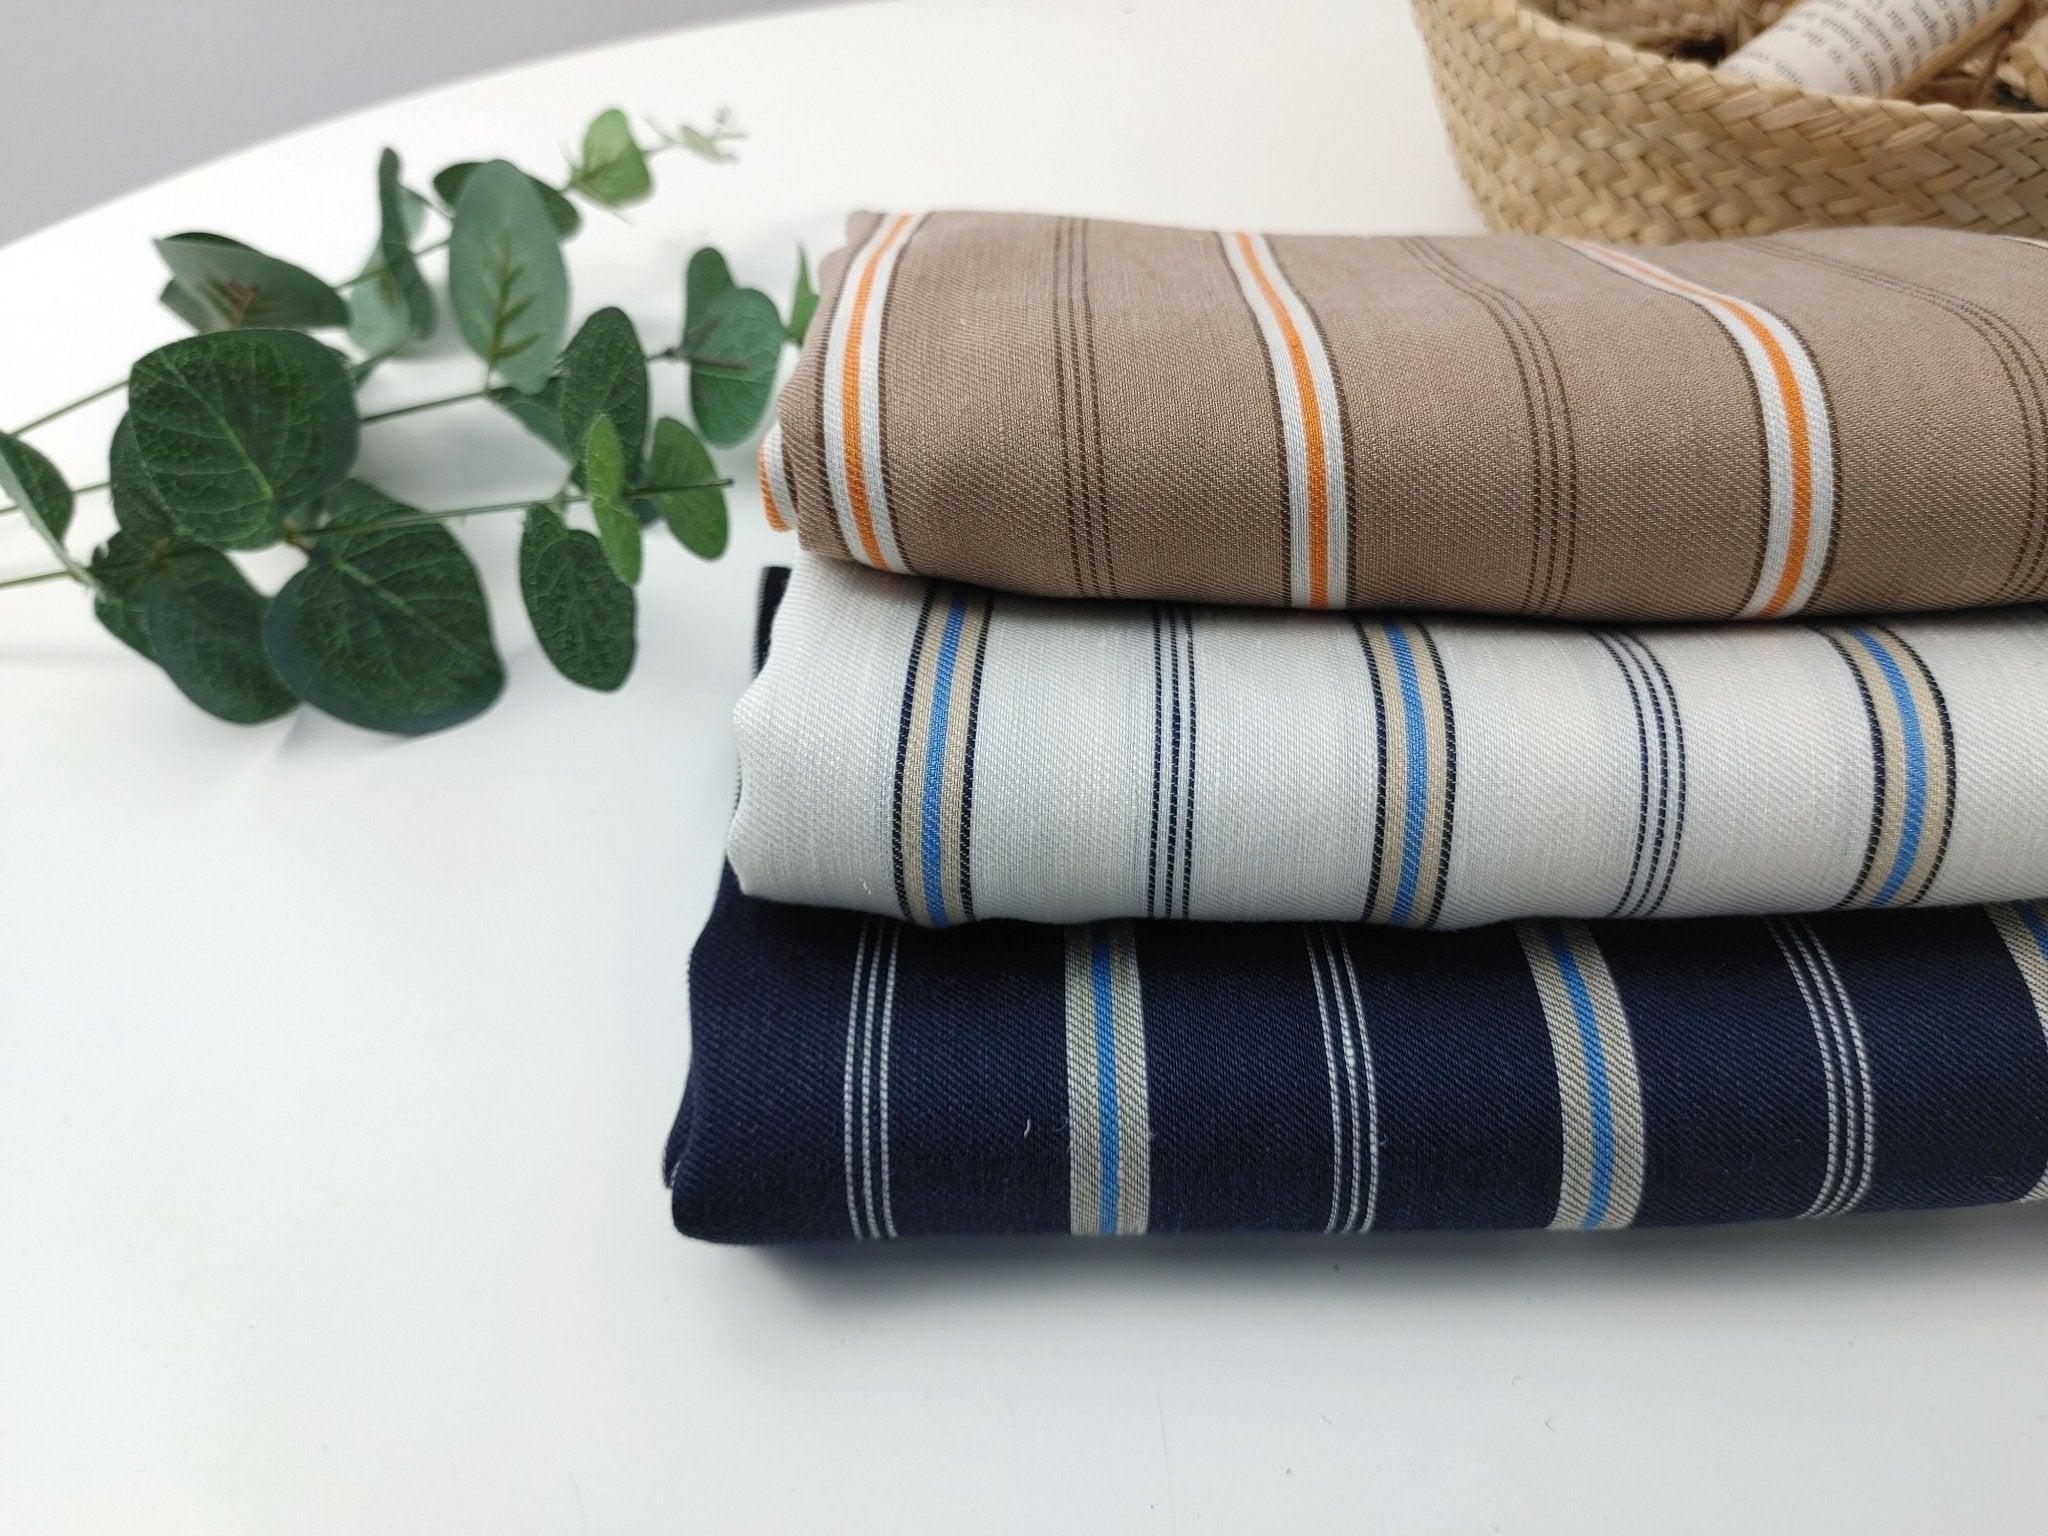 Linen Rayon Twill Fabric with Stripe Pattern, Subtle Glossy Effect 6809 6810 7154 - The Linen Lab - Navy